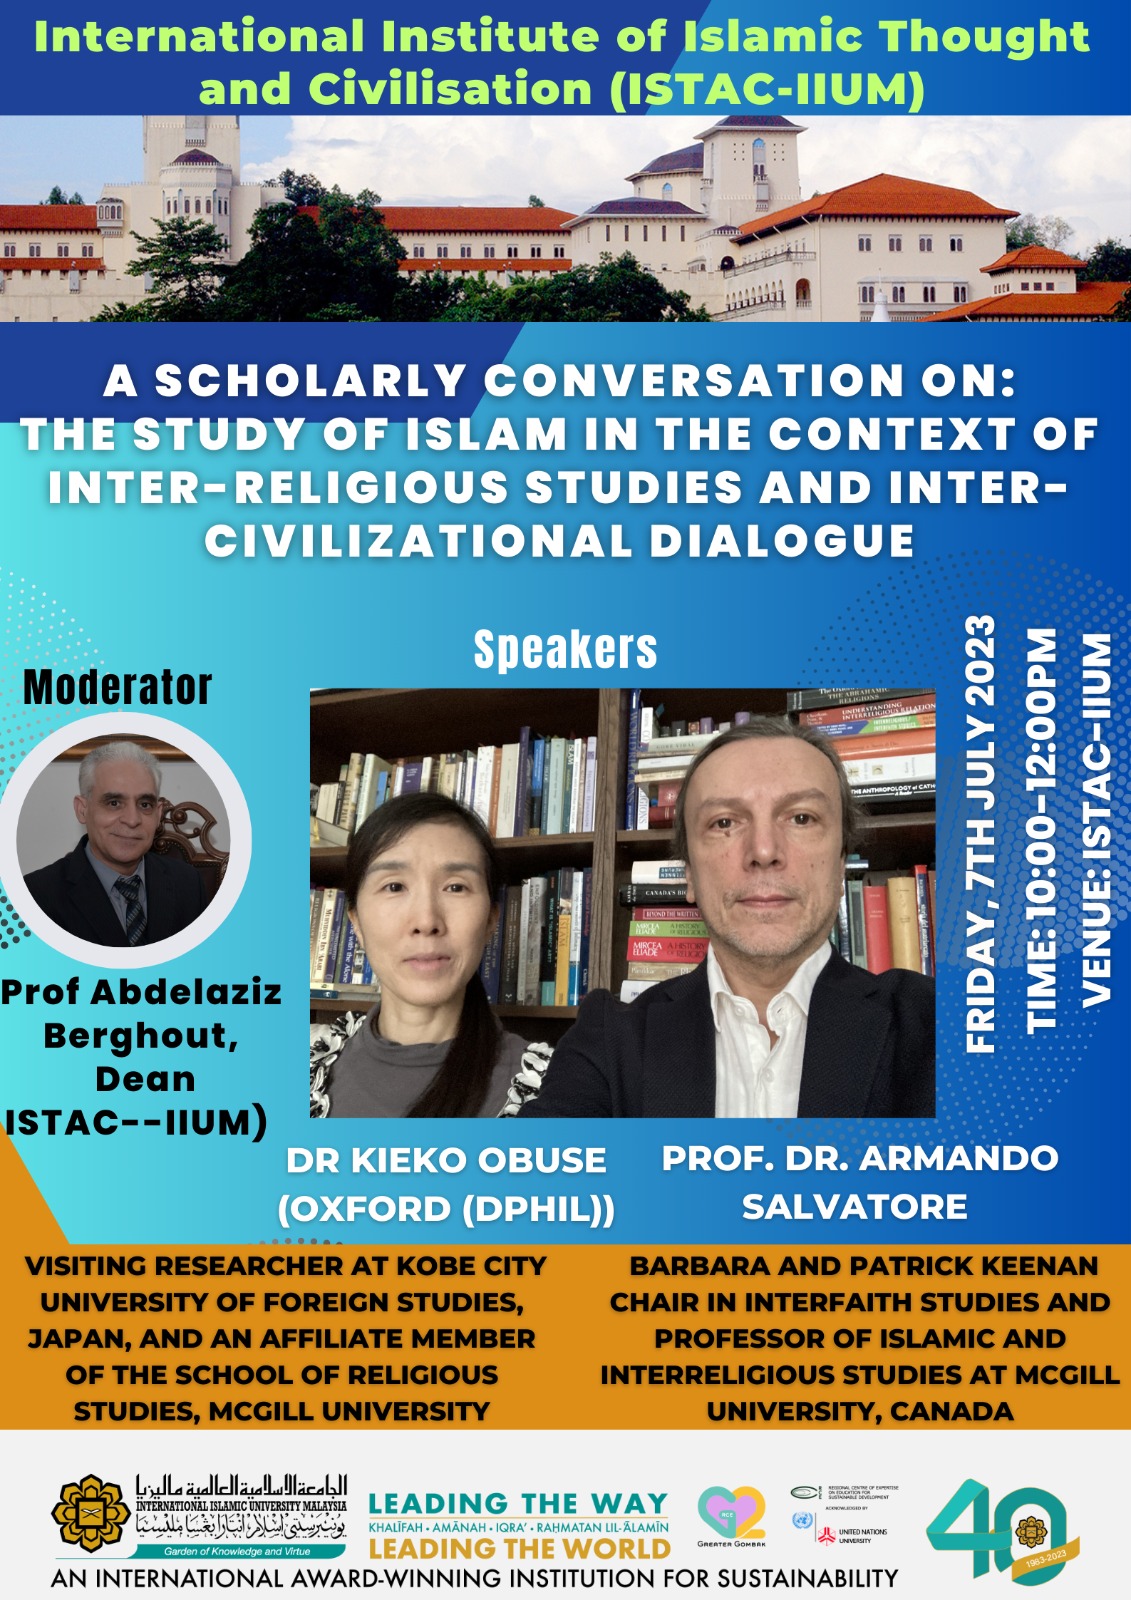 A SCHOLARLY CONVERSATION ON: THE STUDY OF ISLAM IN THE CONTEXT OF INTER-RELIGIOUS STUDIES AND INTER-CIVILIZATIONAL DIALOGUE